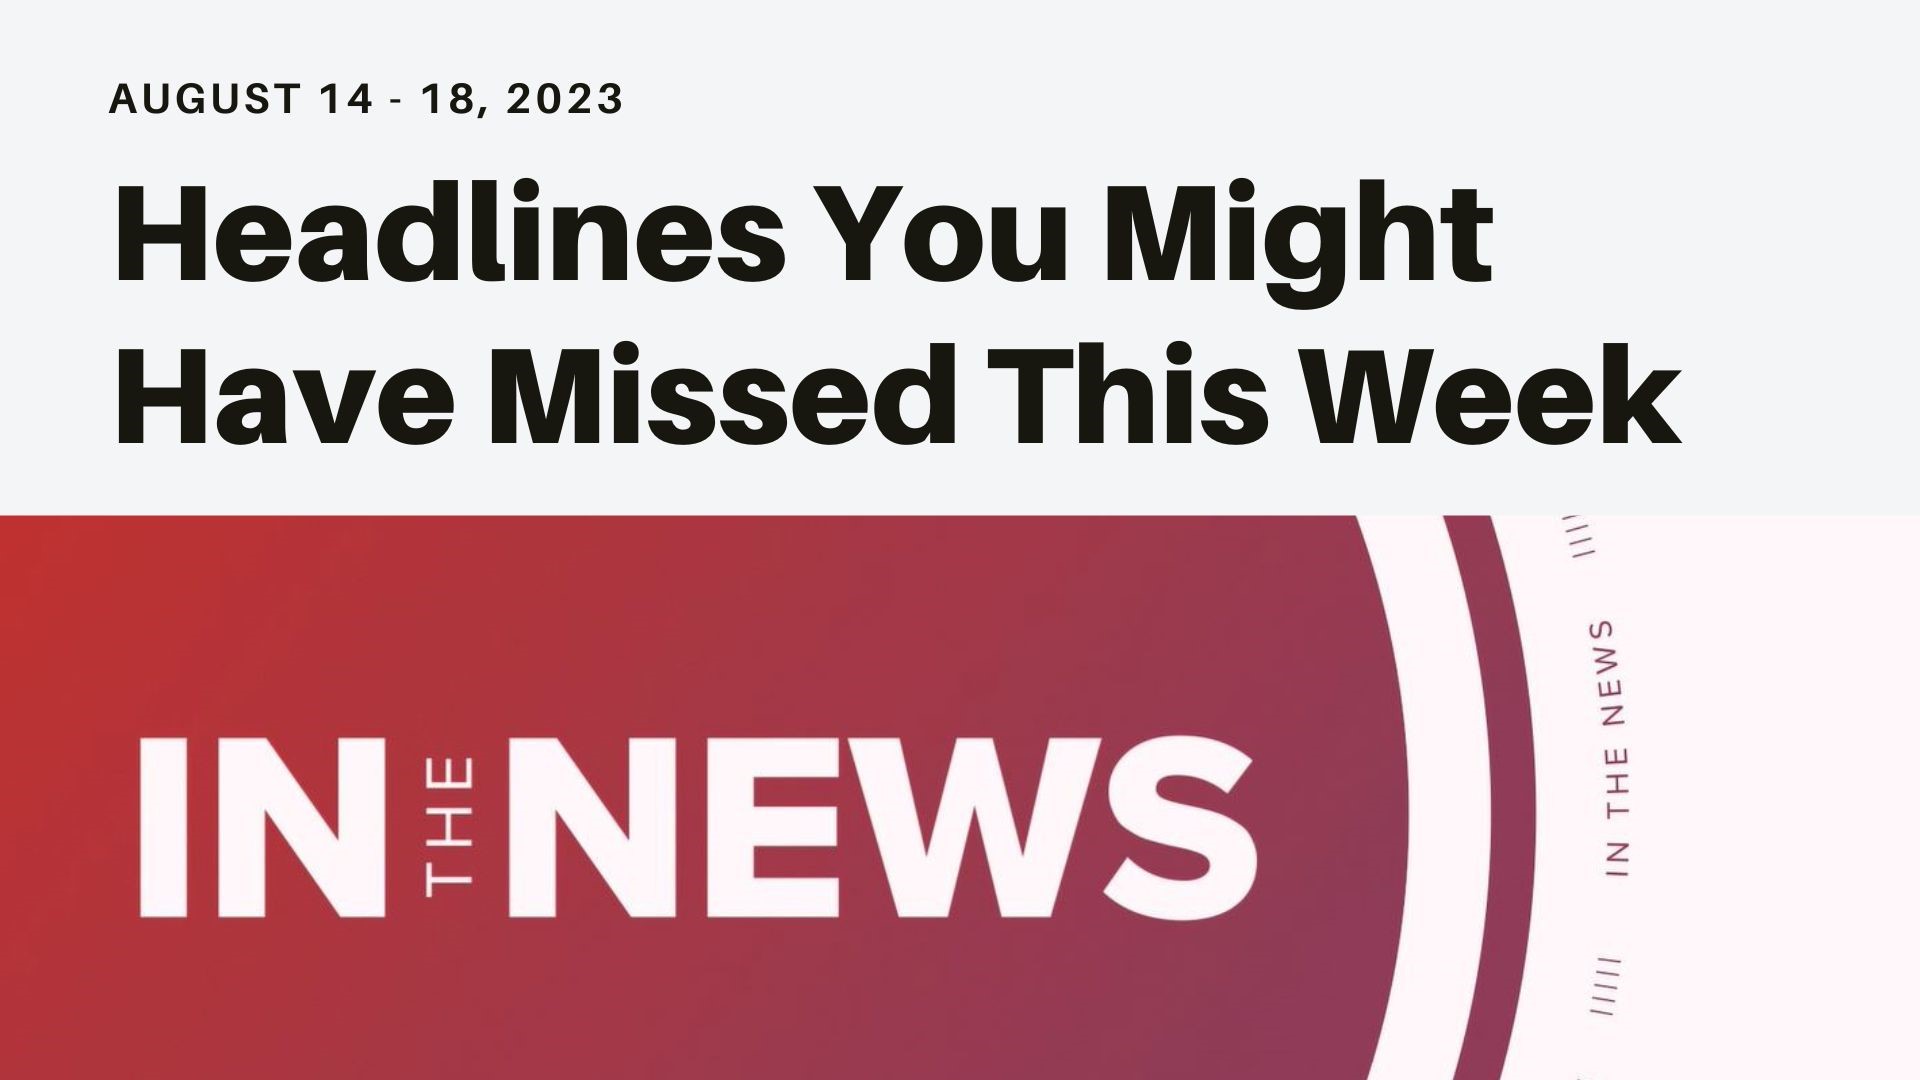 A look at the headlines you might have missed this week from Trump facing his 4th indictment to the climbing death toll in Maui and a new DC superhero movie.